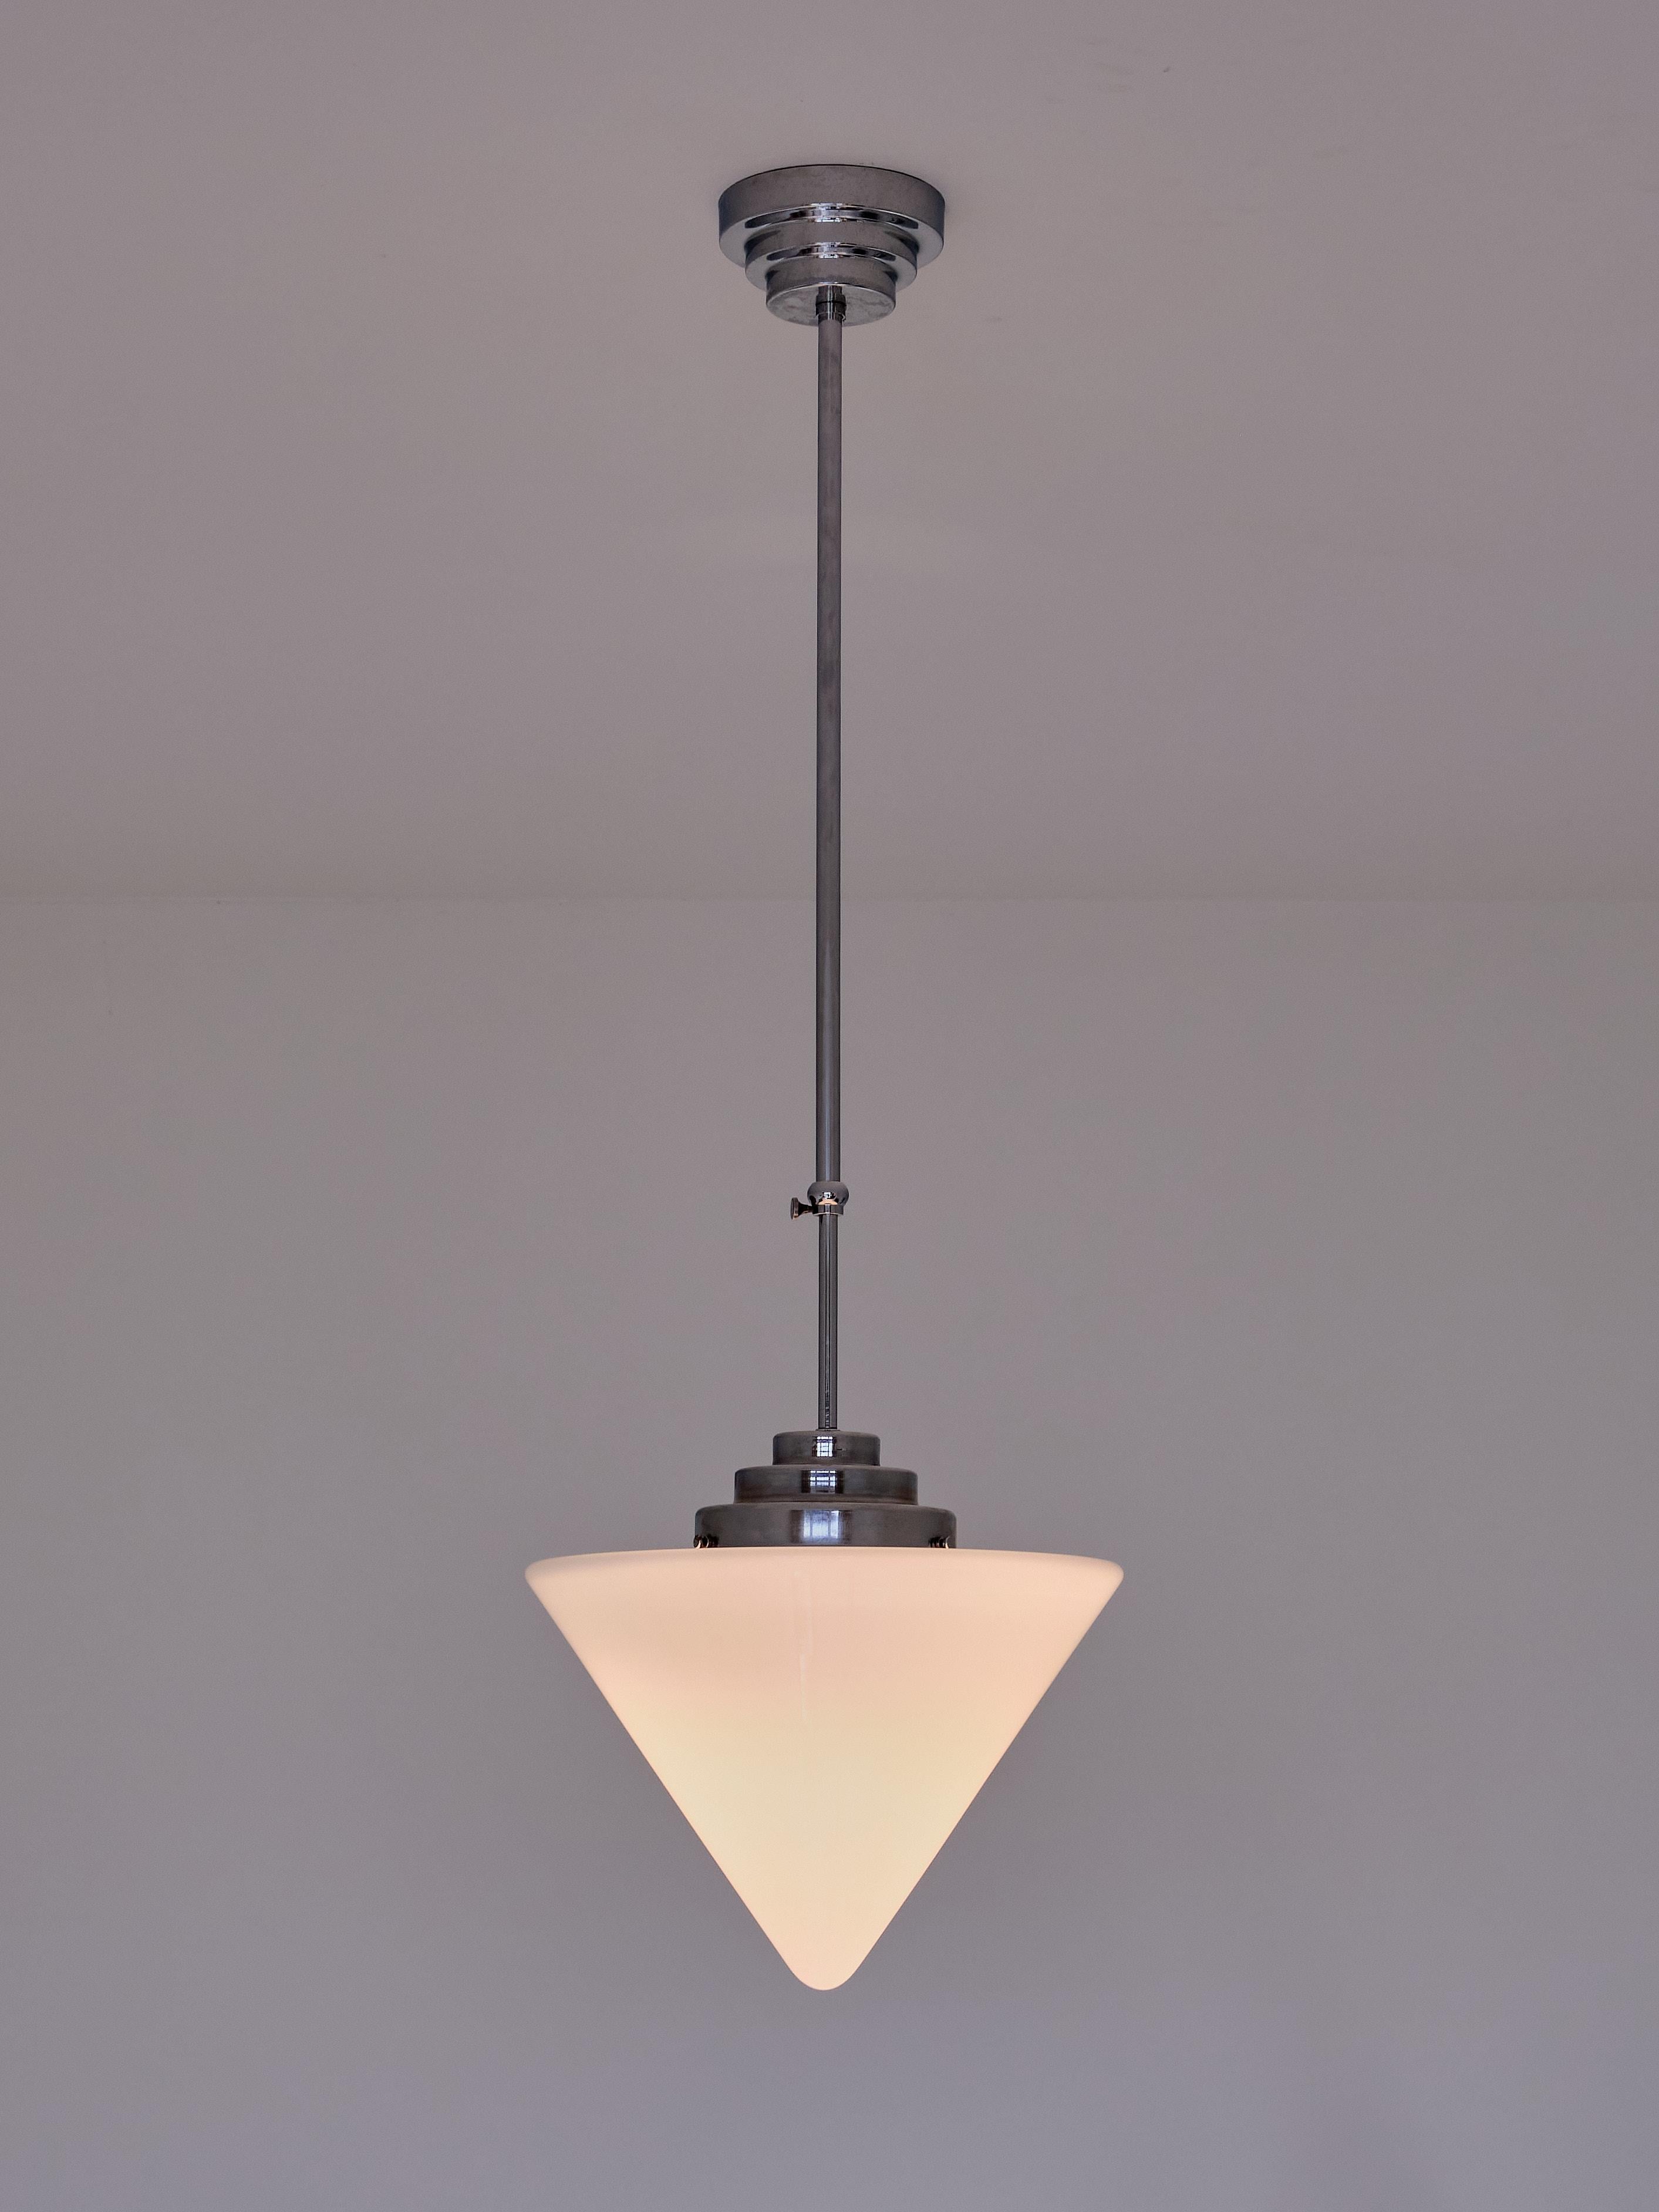 Gispen Cone Shaped Pendant Light with Adjustable Drop Height, Netherlands, 1950s For Sale 2